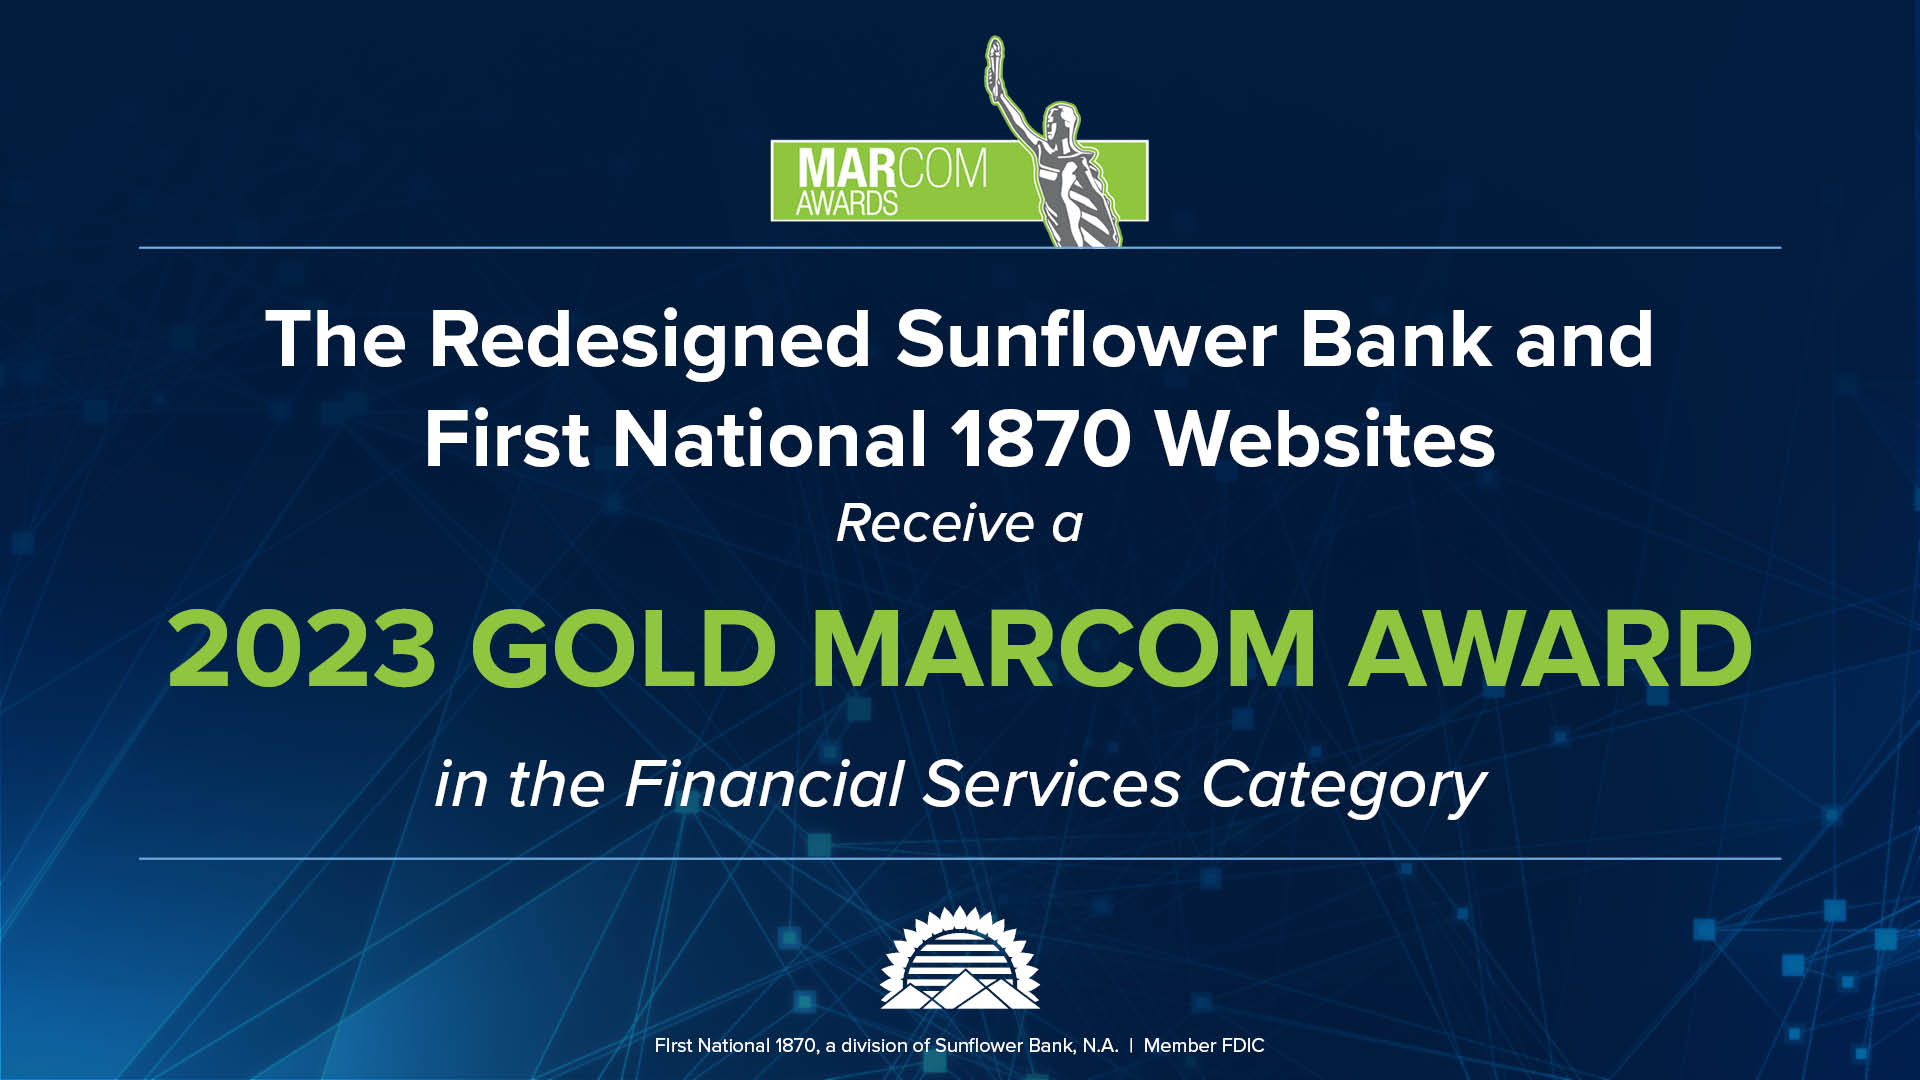 The Redesigned Sunflower Bank and First National 1870 Websites receive a 2023 Gold Marcom Award